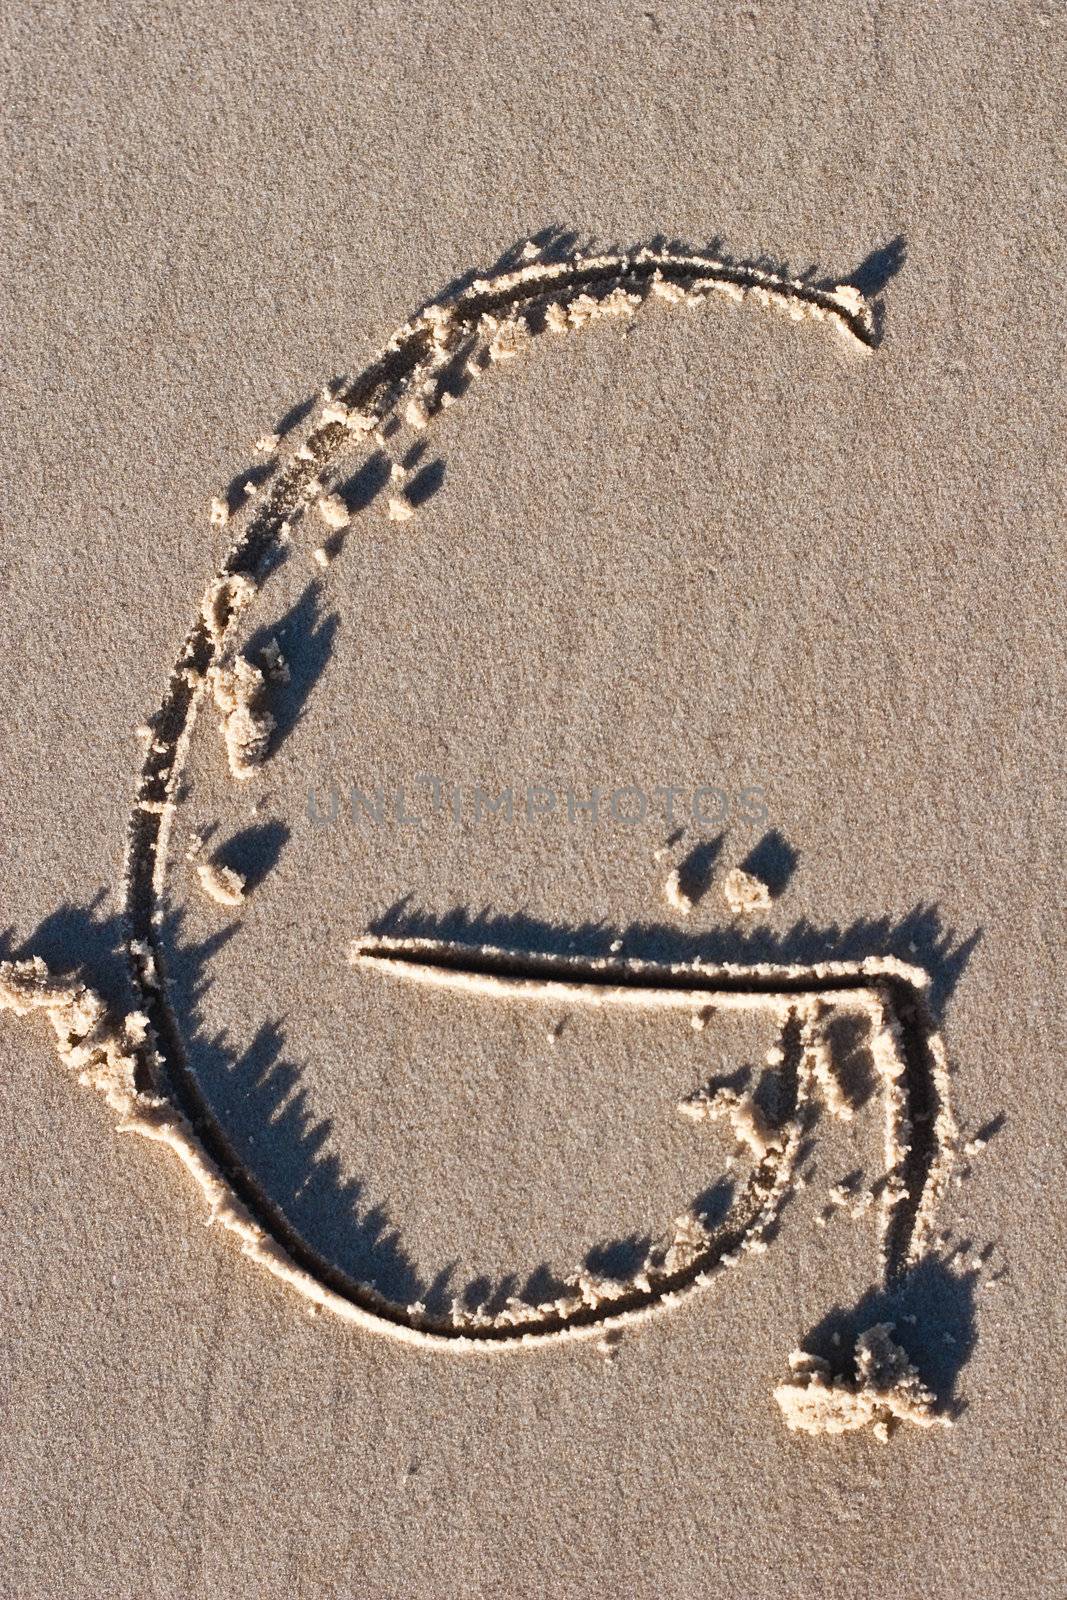 Letter G drawn in the sand.